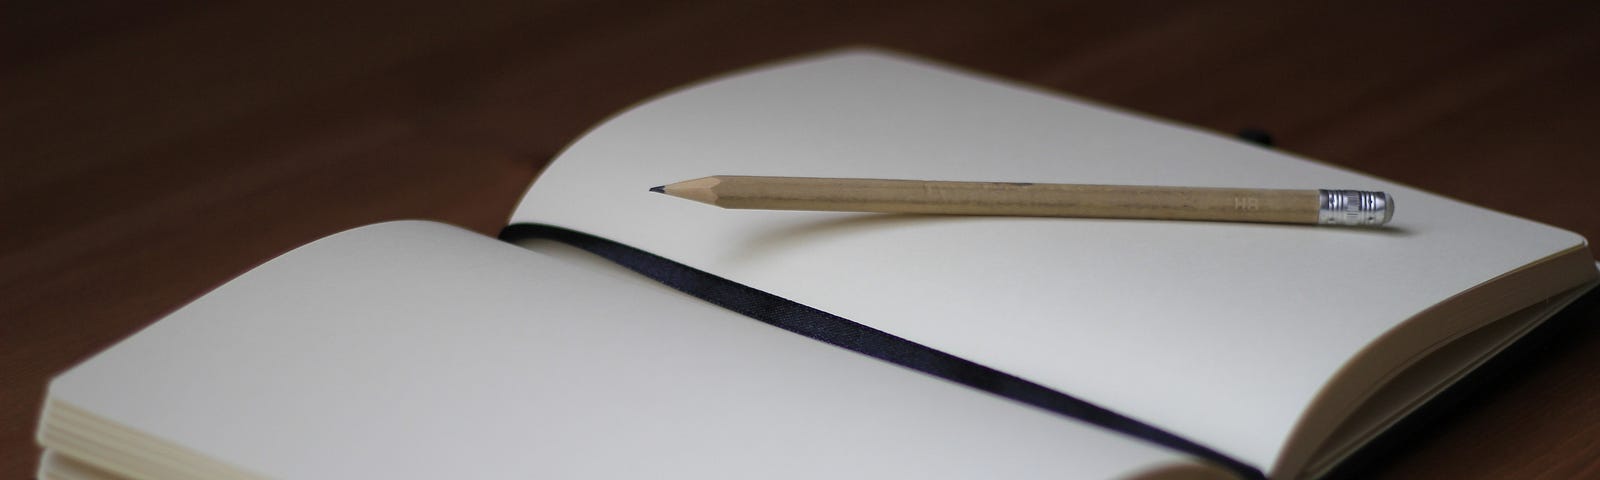 Open notebook with a pencil lying across it.